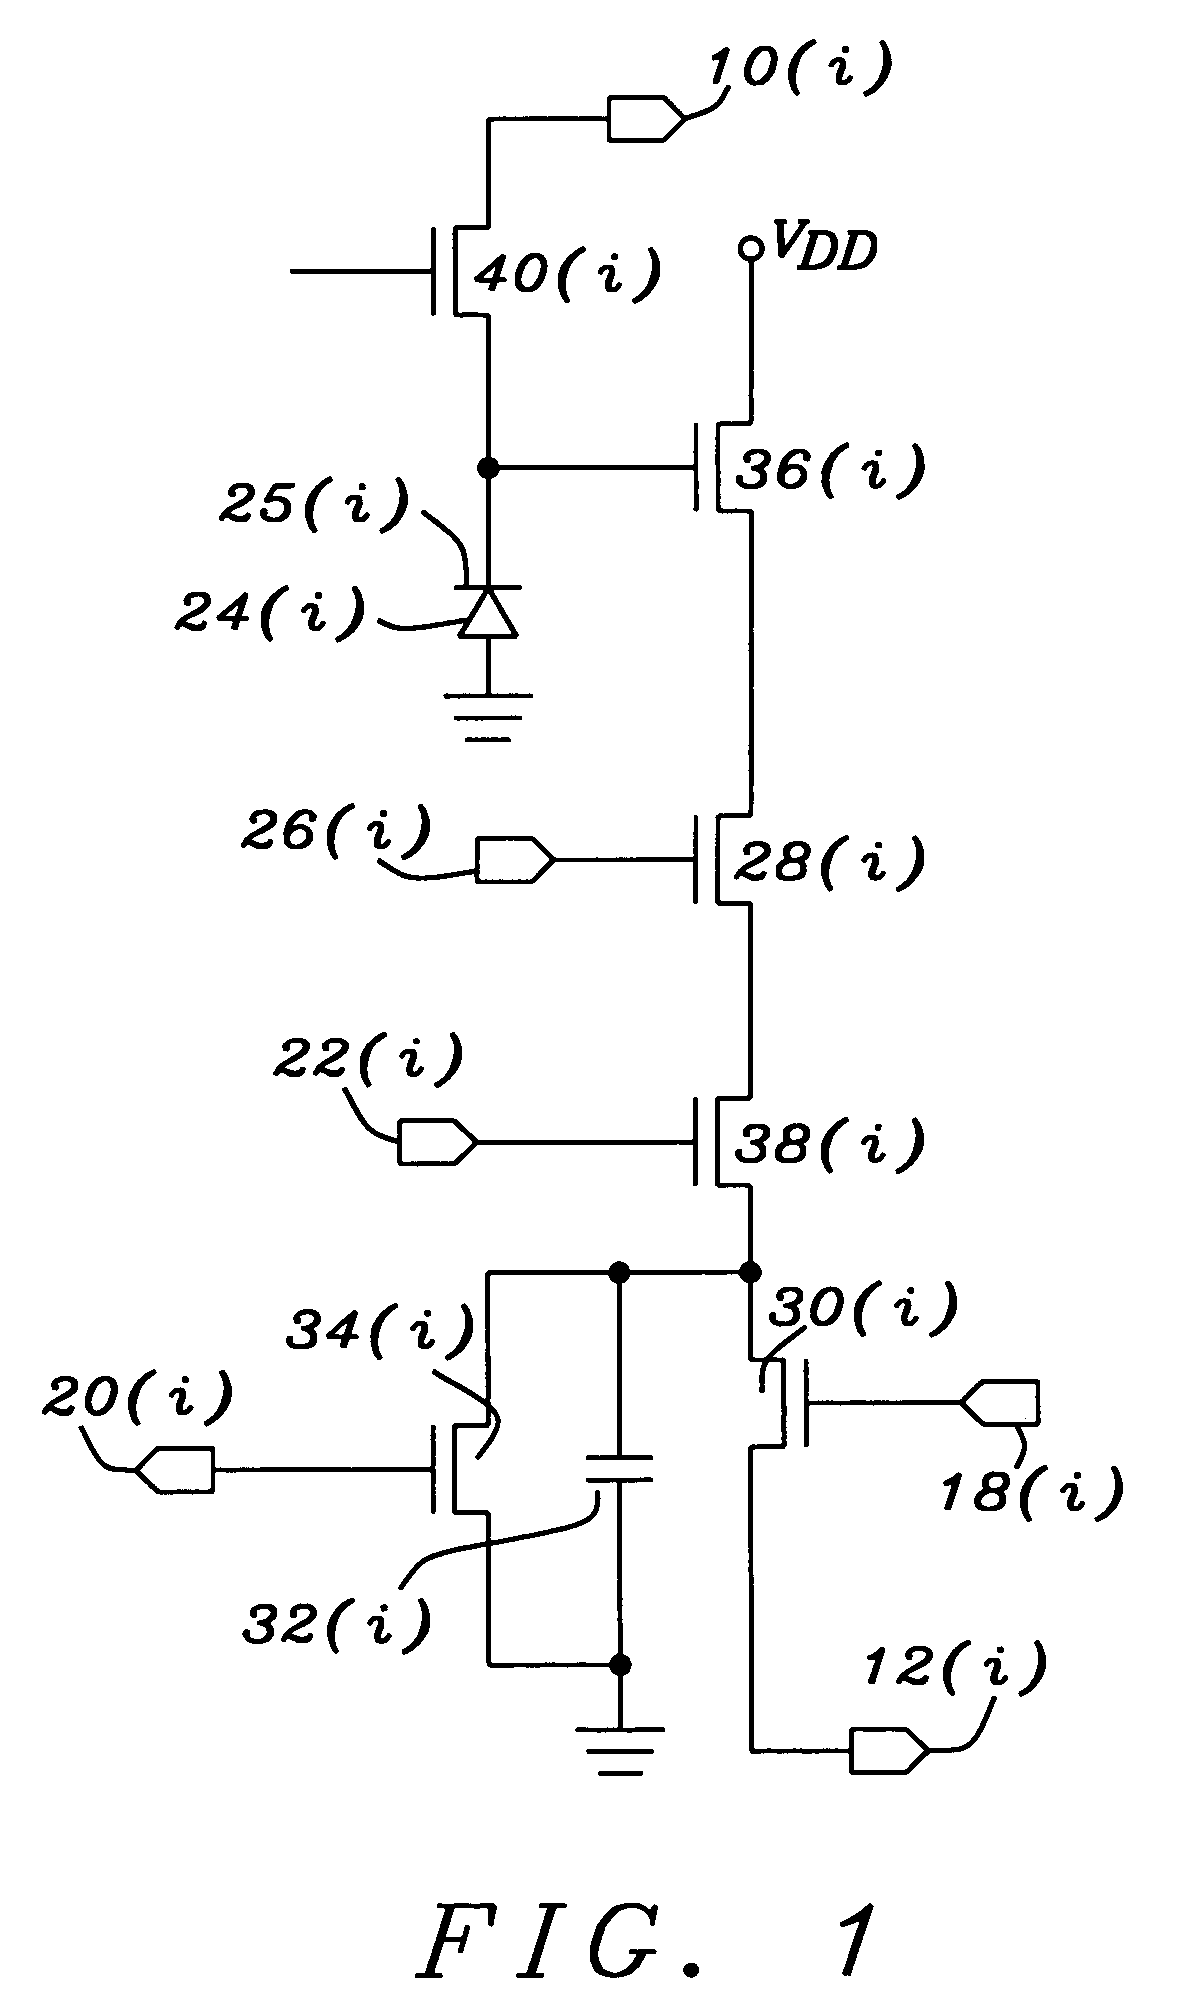 CMOS APS readout scheme that combines reset drain current and the source follower output